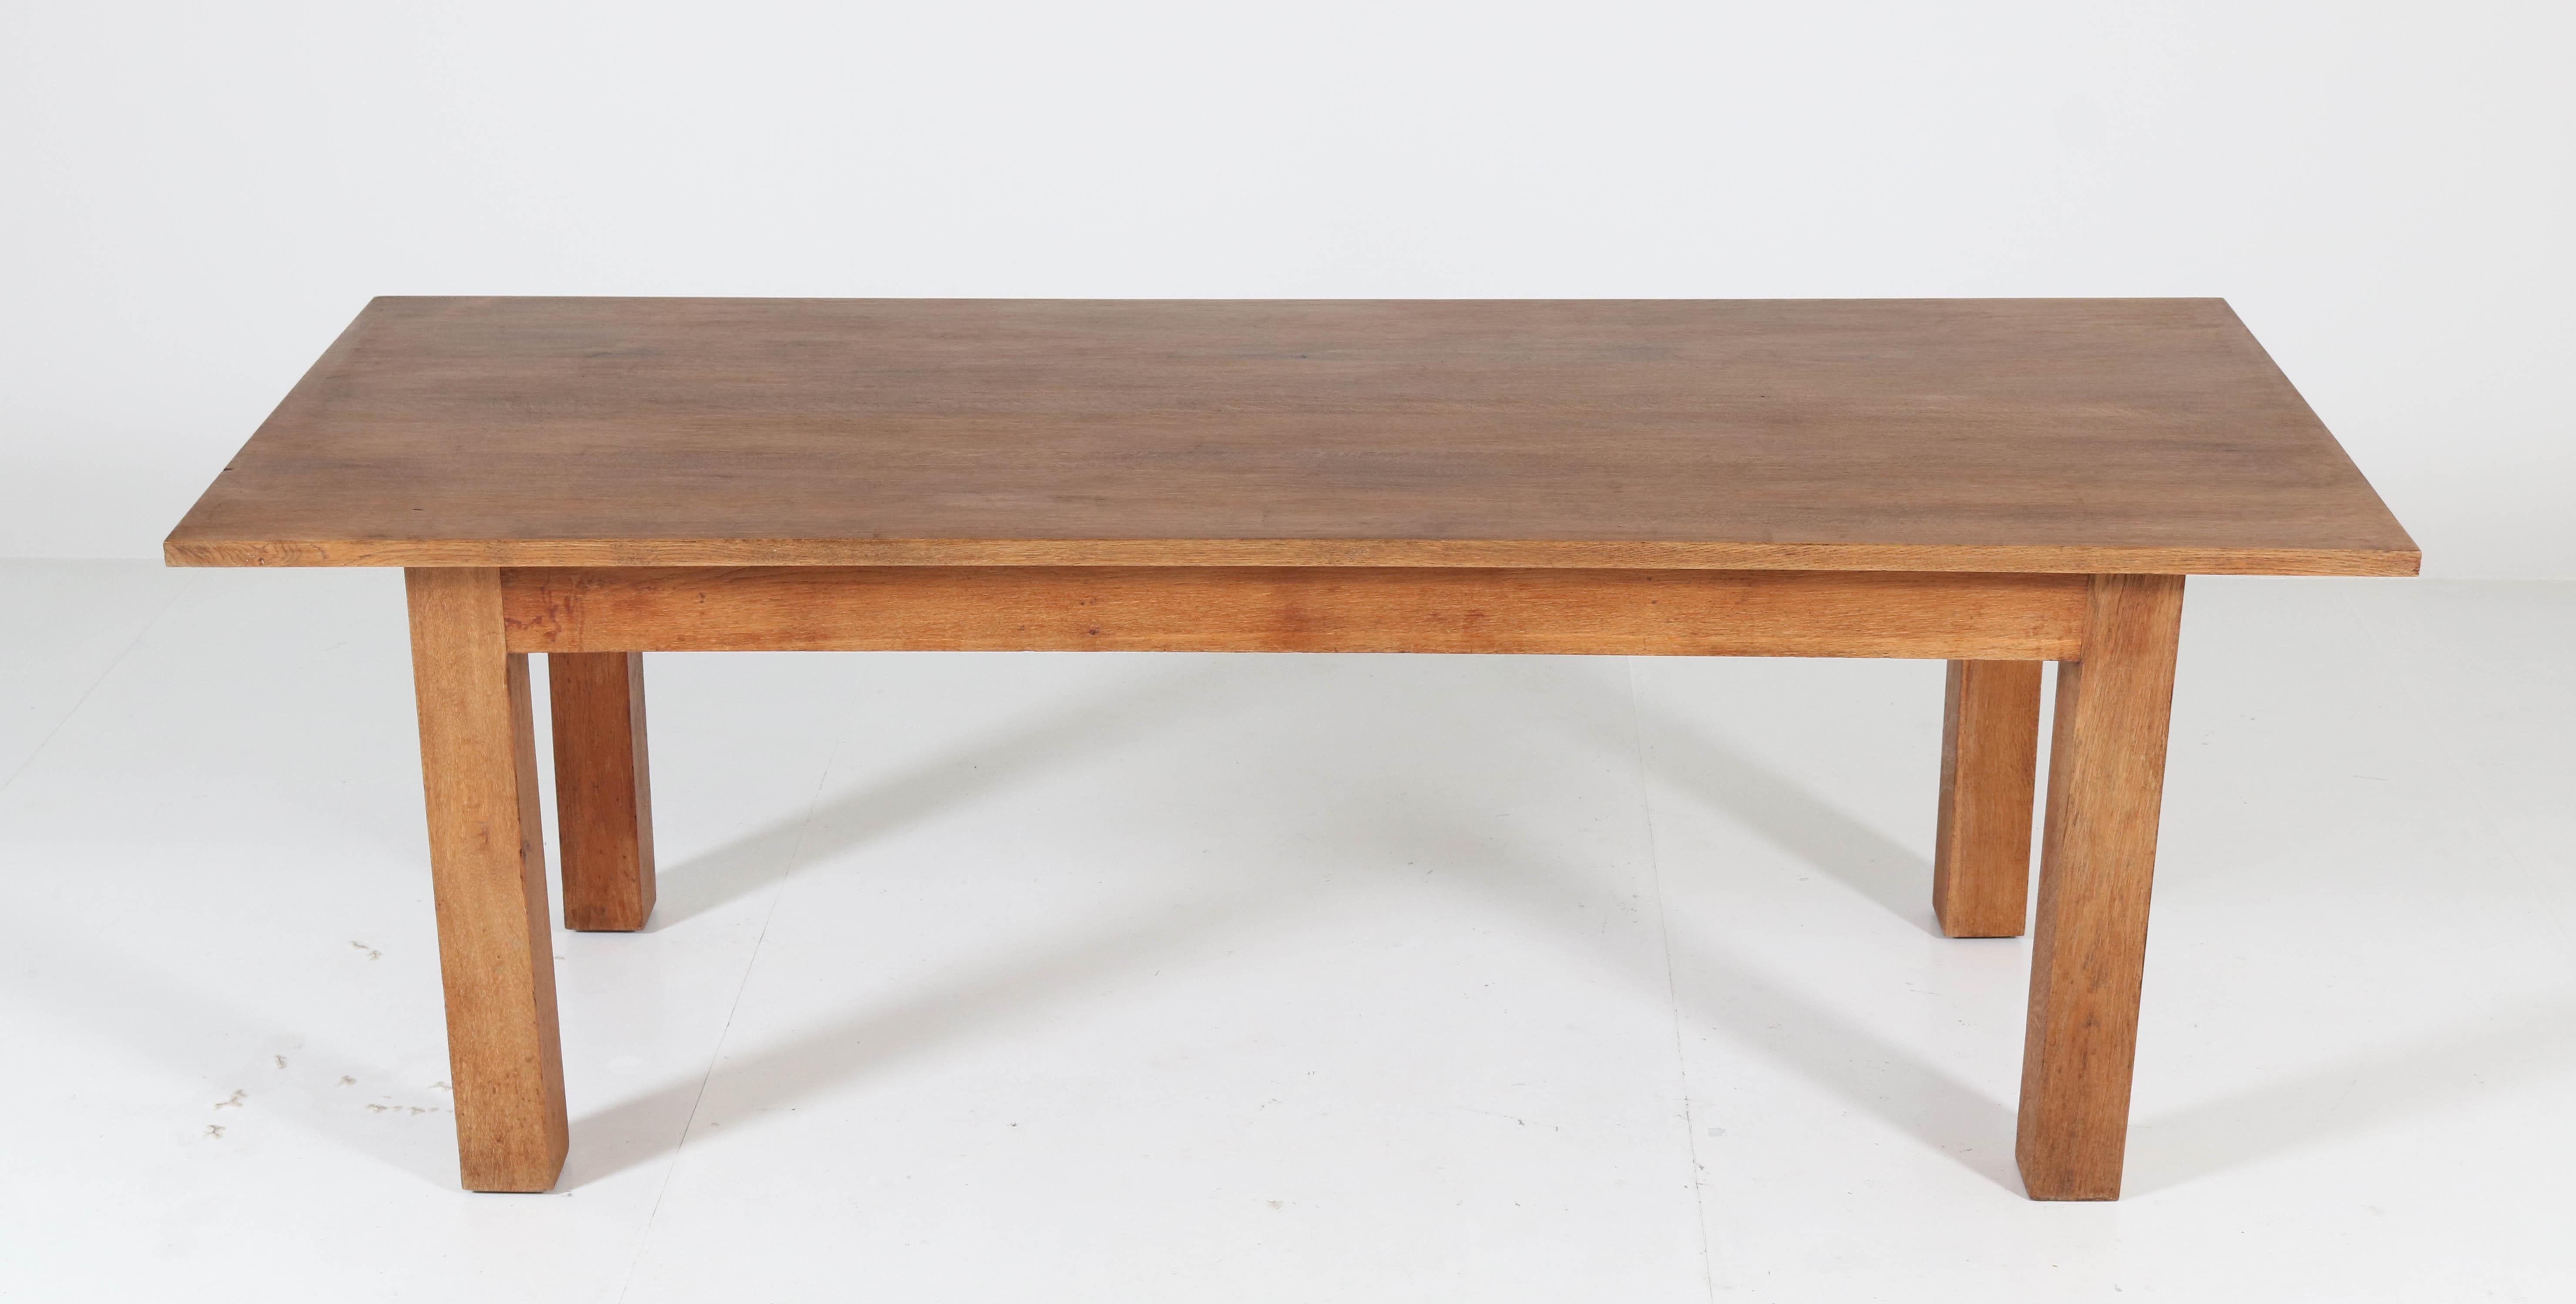 Oak Art Deco Haagse School Table by Cor Alons, 1923 In Good Condition For Sale In Amsterdam, NL